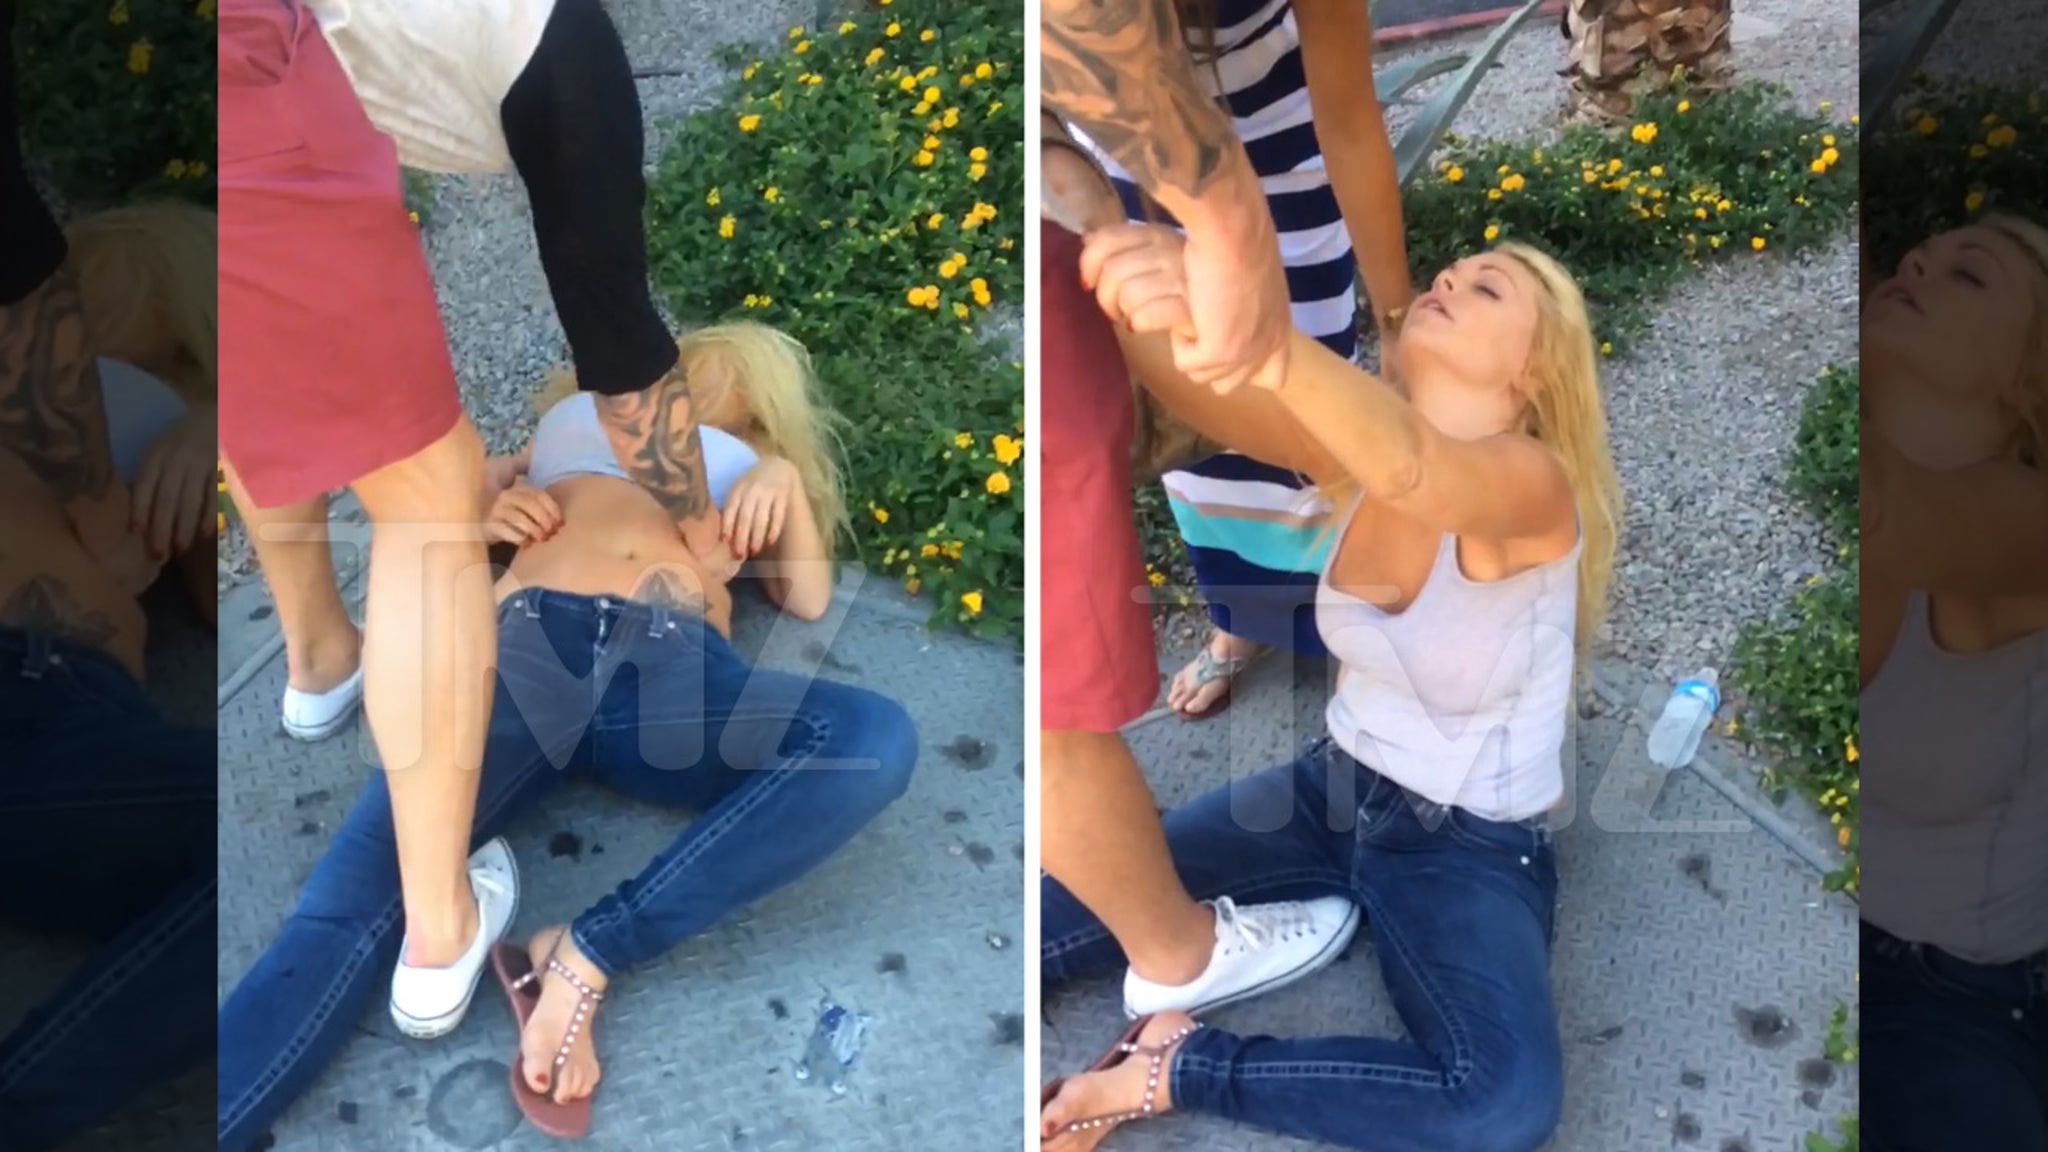 Passed Out Babe Porn - Porn Star Jesse Jane -- Passed OUT COLD On the Vegas Strip! (VIDEO)